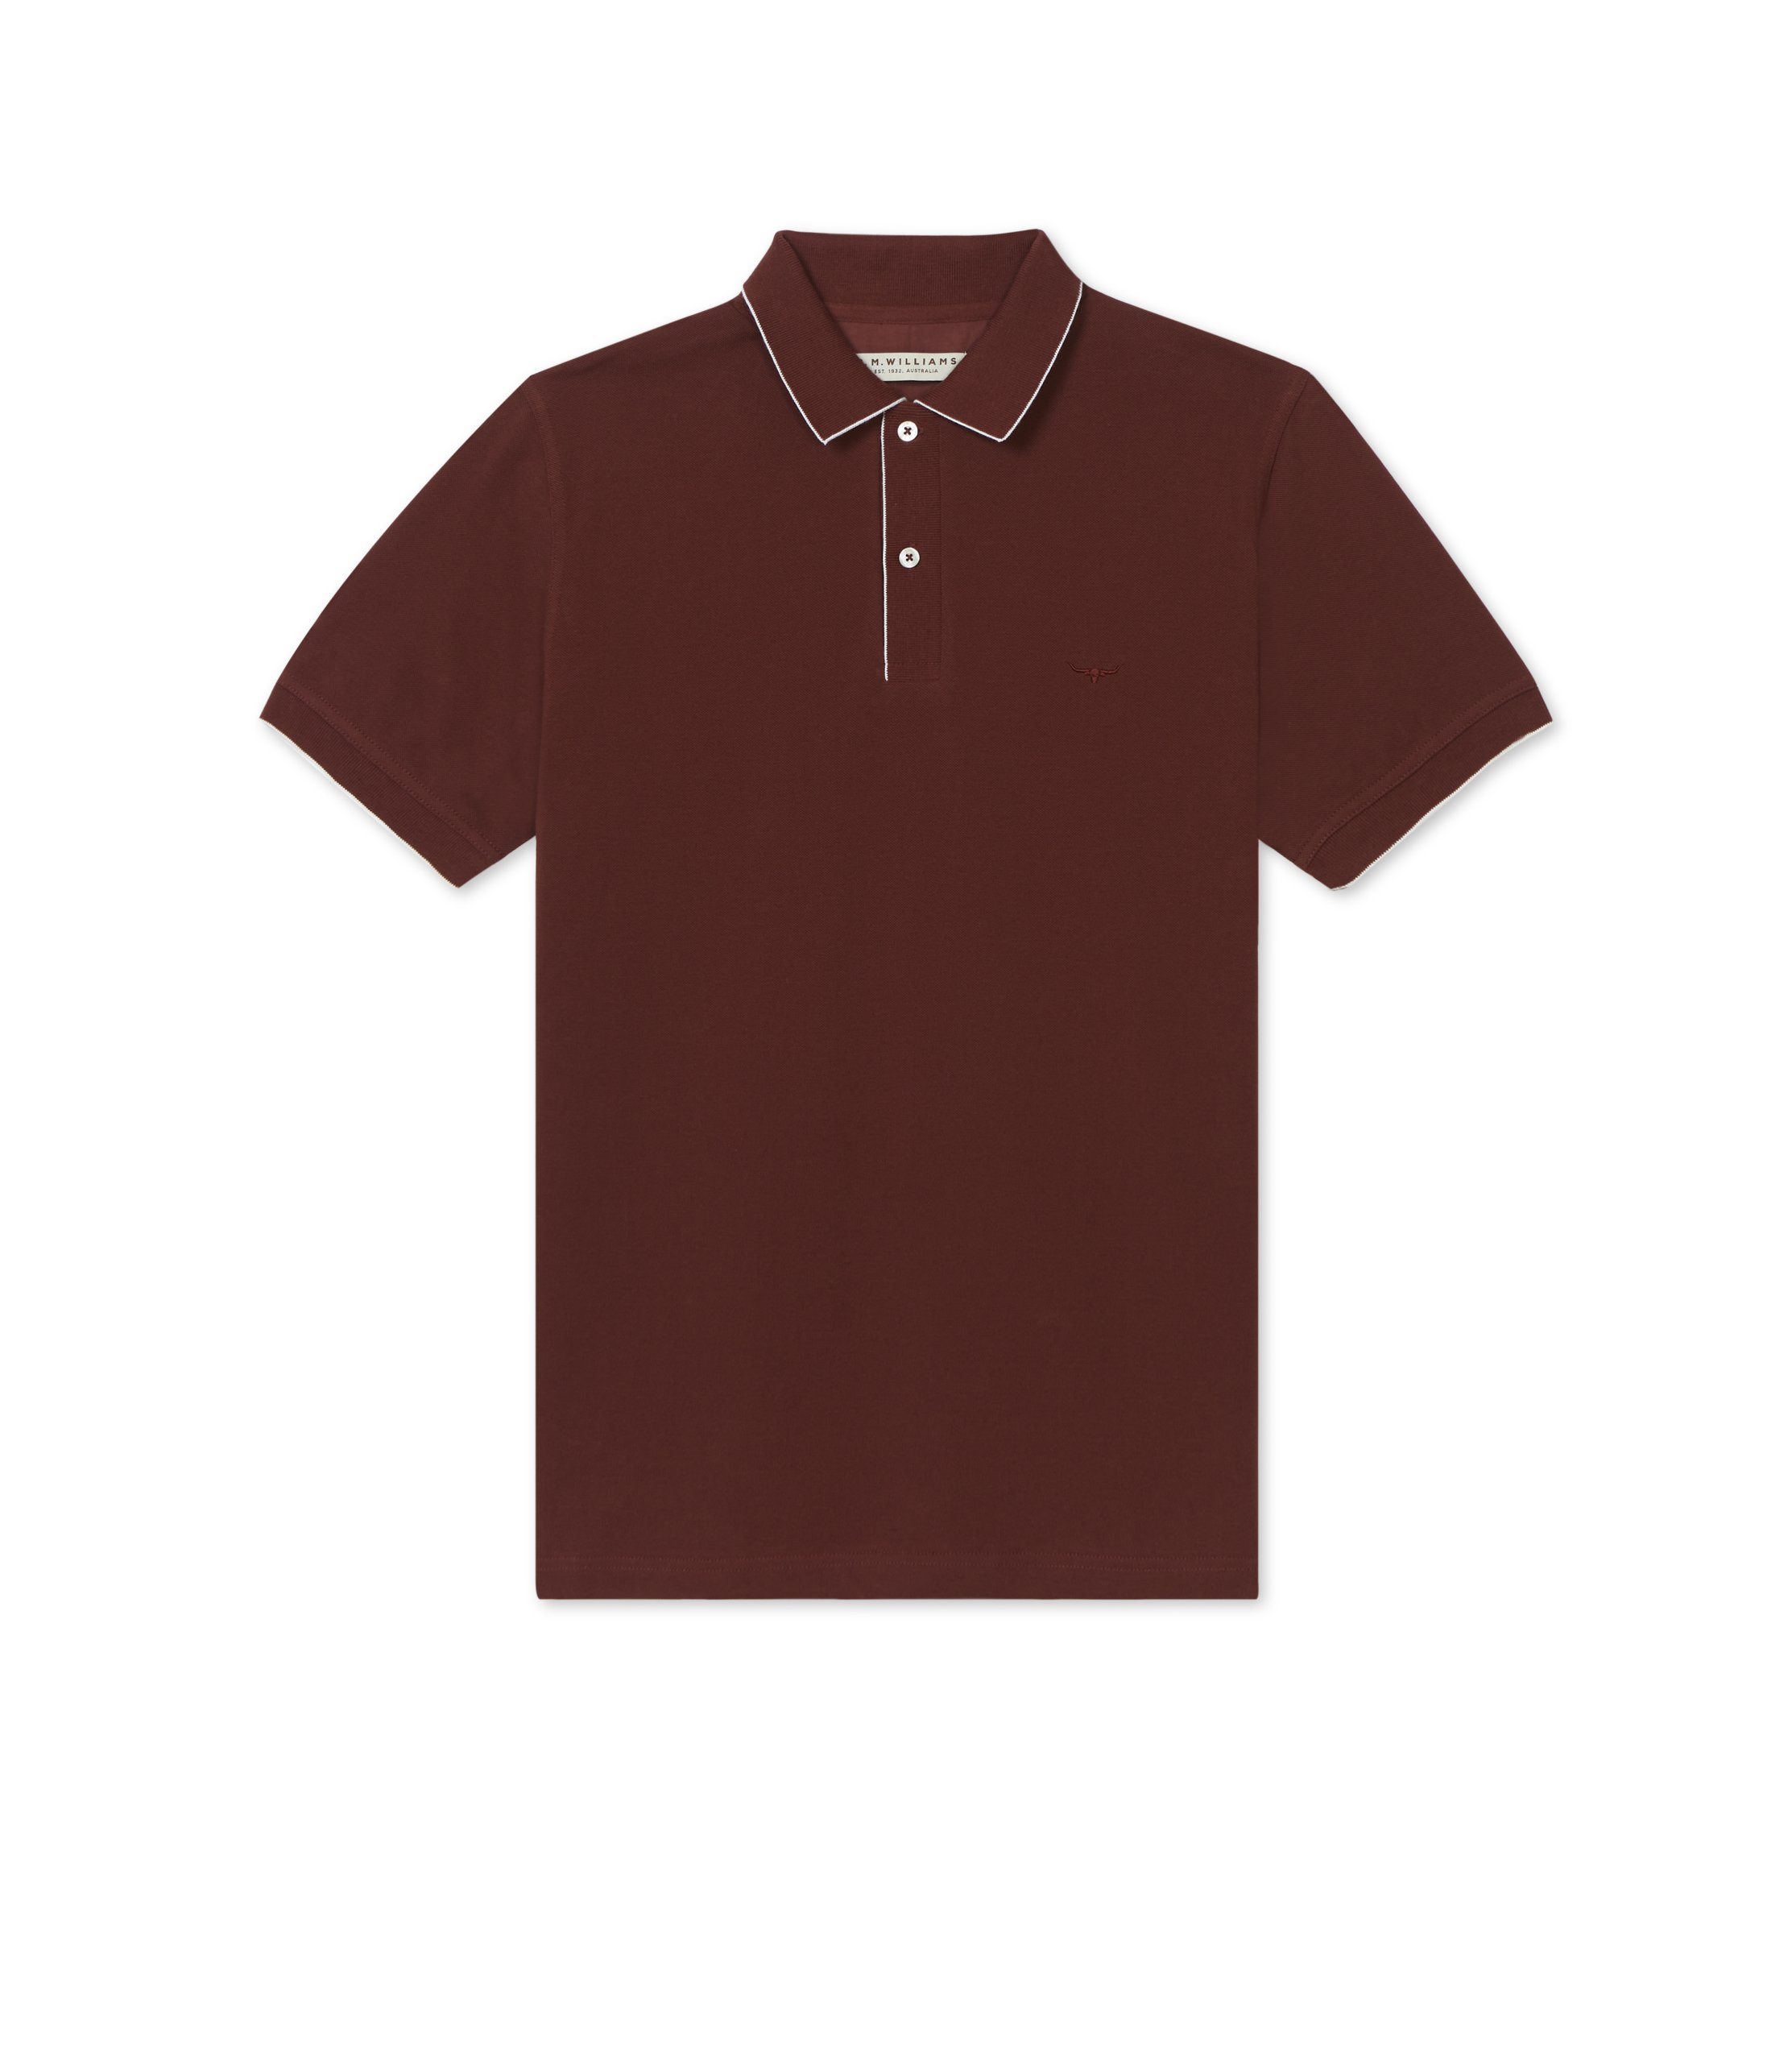 R M Williams Rokewood Polo Shirt front